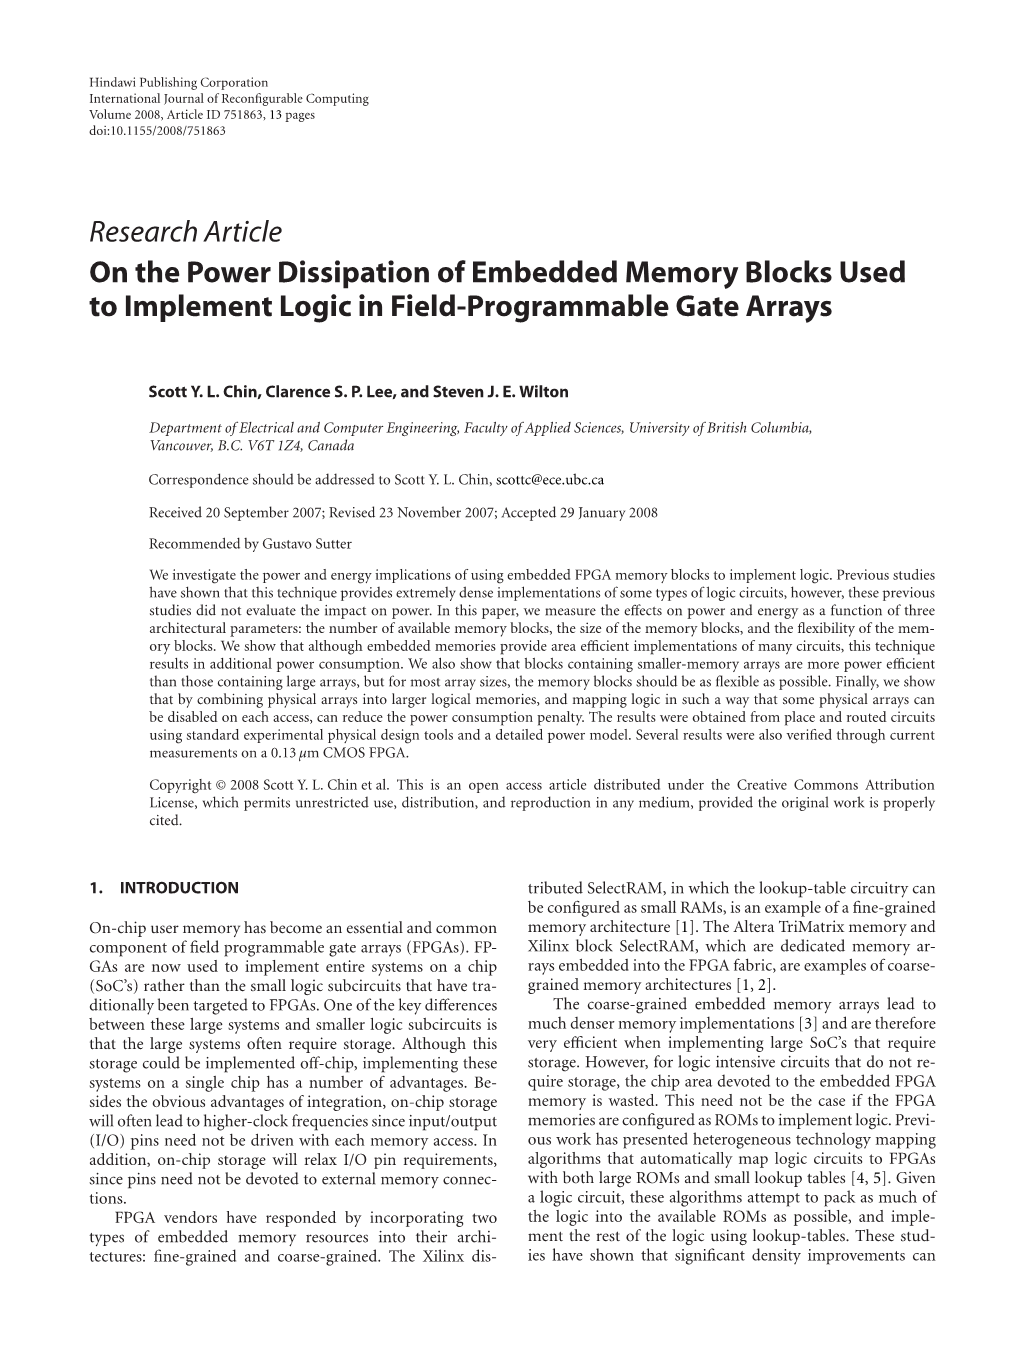 Research Article on the Power Dissipation of Embedded Memory Blocks Used to Implement Logic in Field-Programmable Gate Arrays